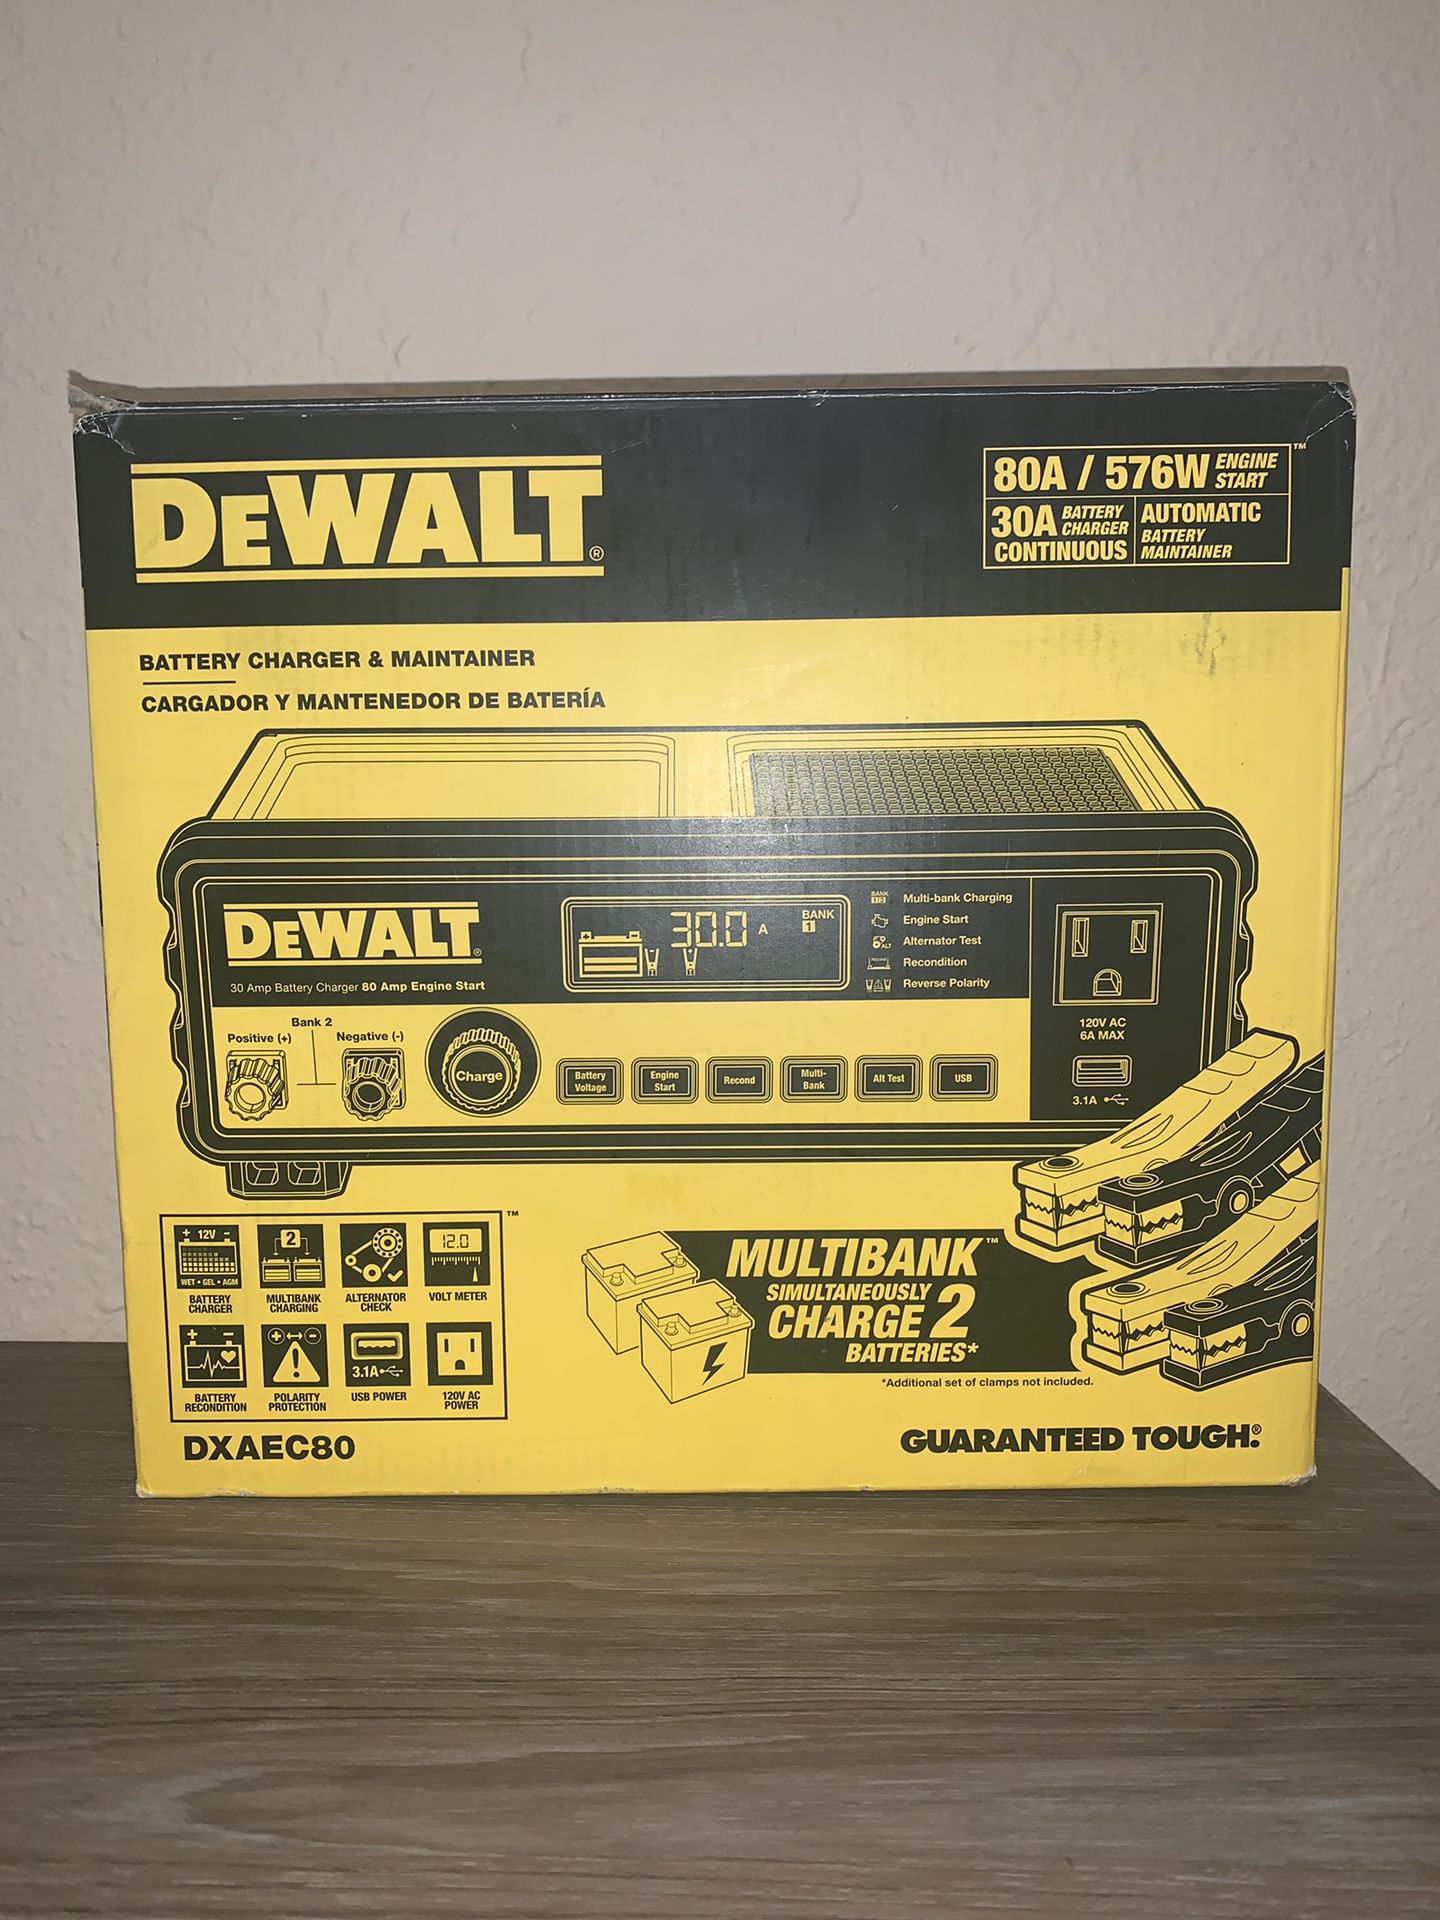 NEW DEWALT BATTERY CHARGER & MAINTAINER